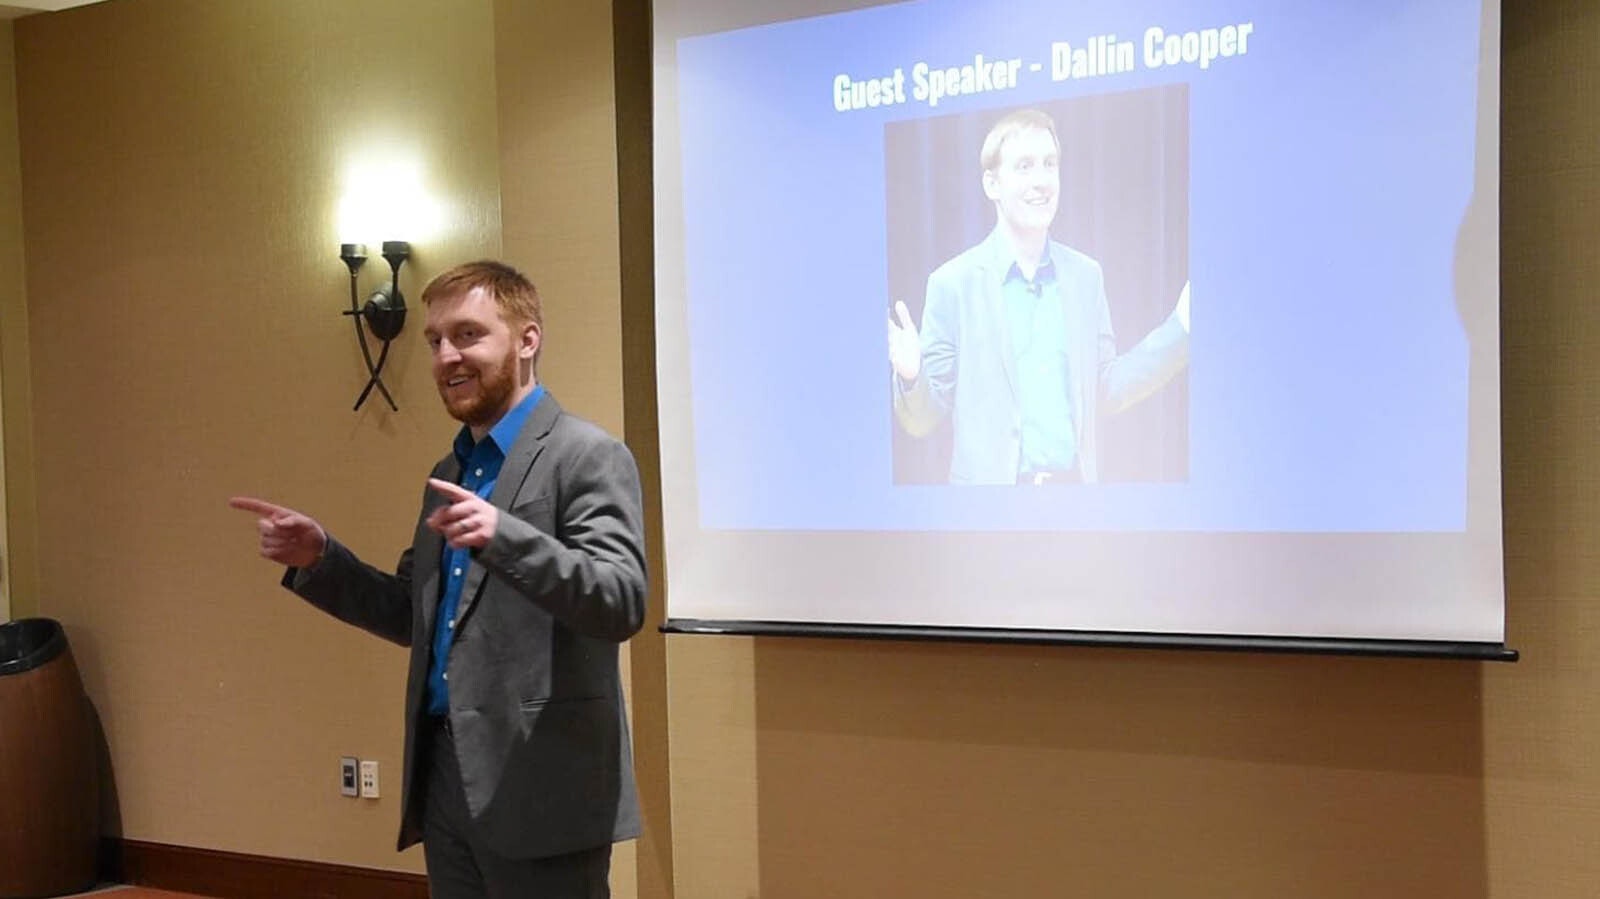 Dallin Cooper grew up in Riverton, Wyoming, and spent time living in China. He's now a popular motivational speaker around the Cowboy State.